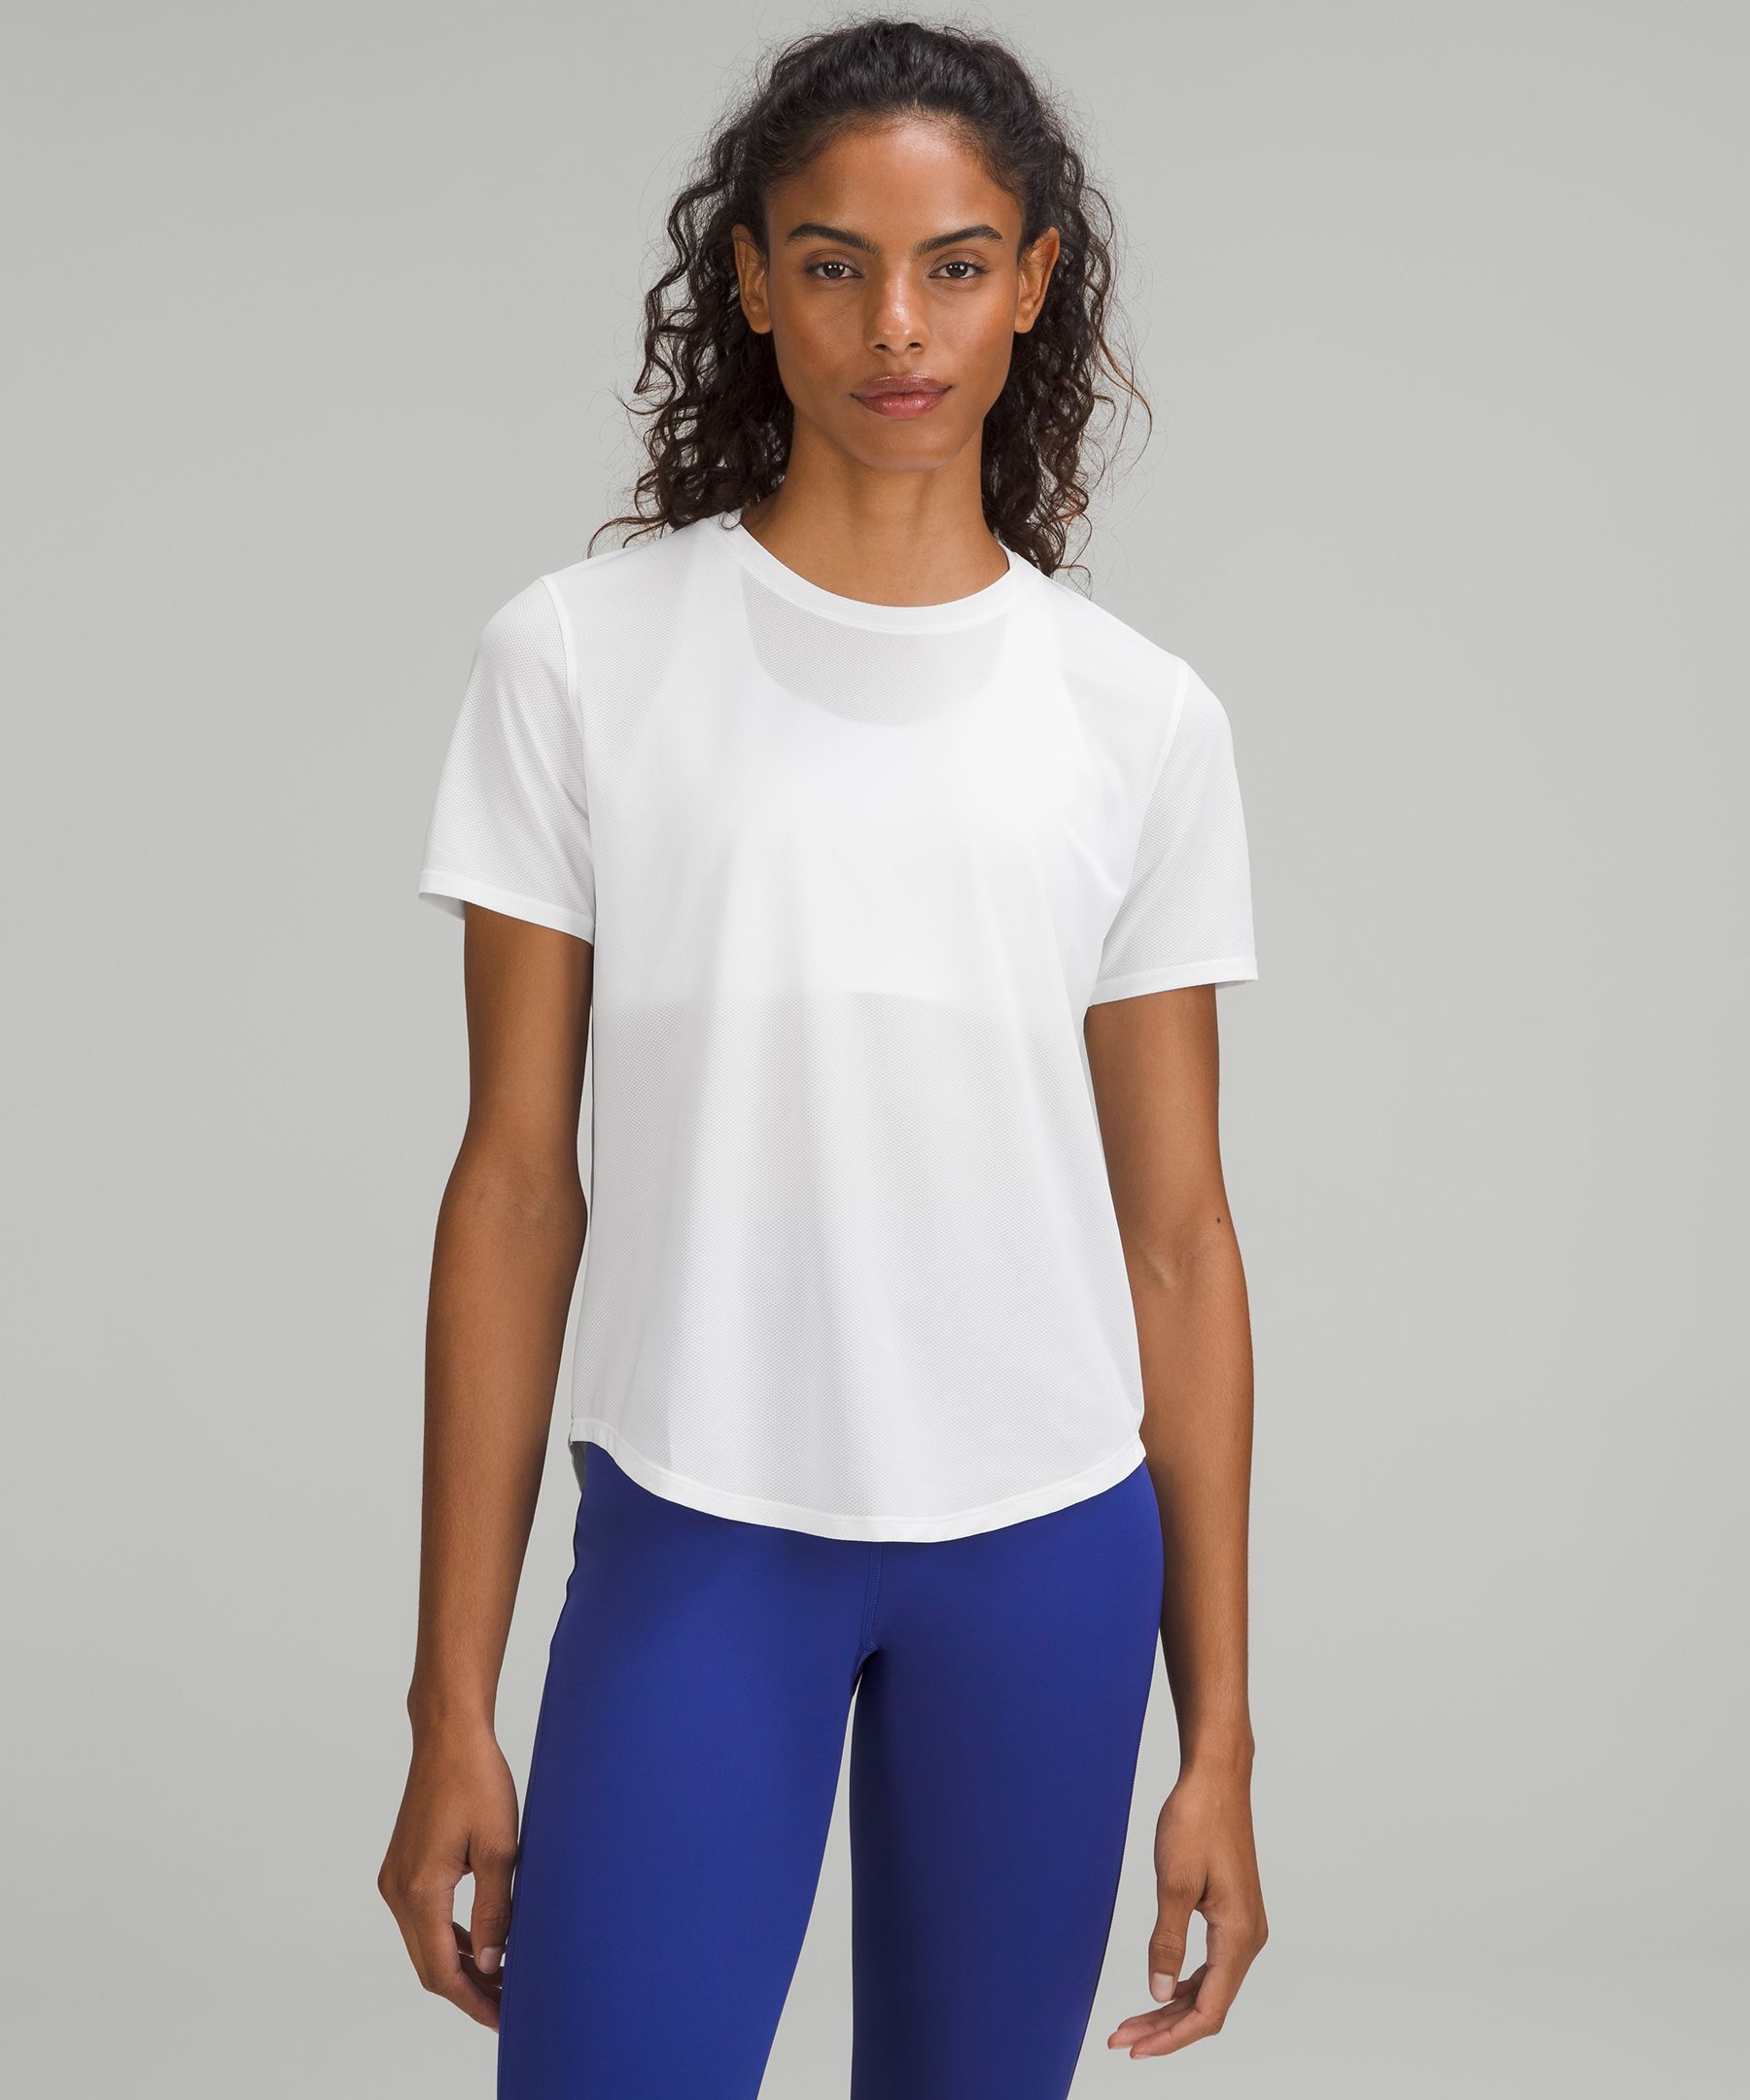 Lululemon Fabric Tops Woman Fitness Gym Clothing Quality Dry Fit